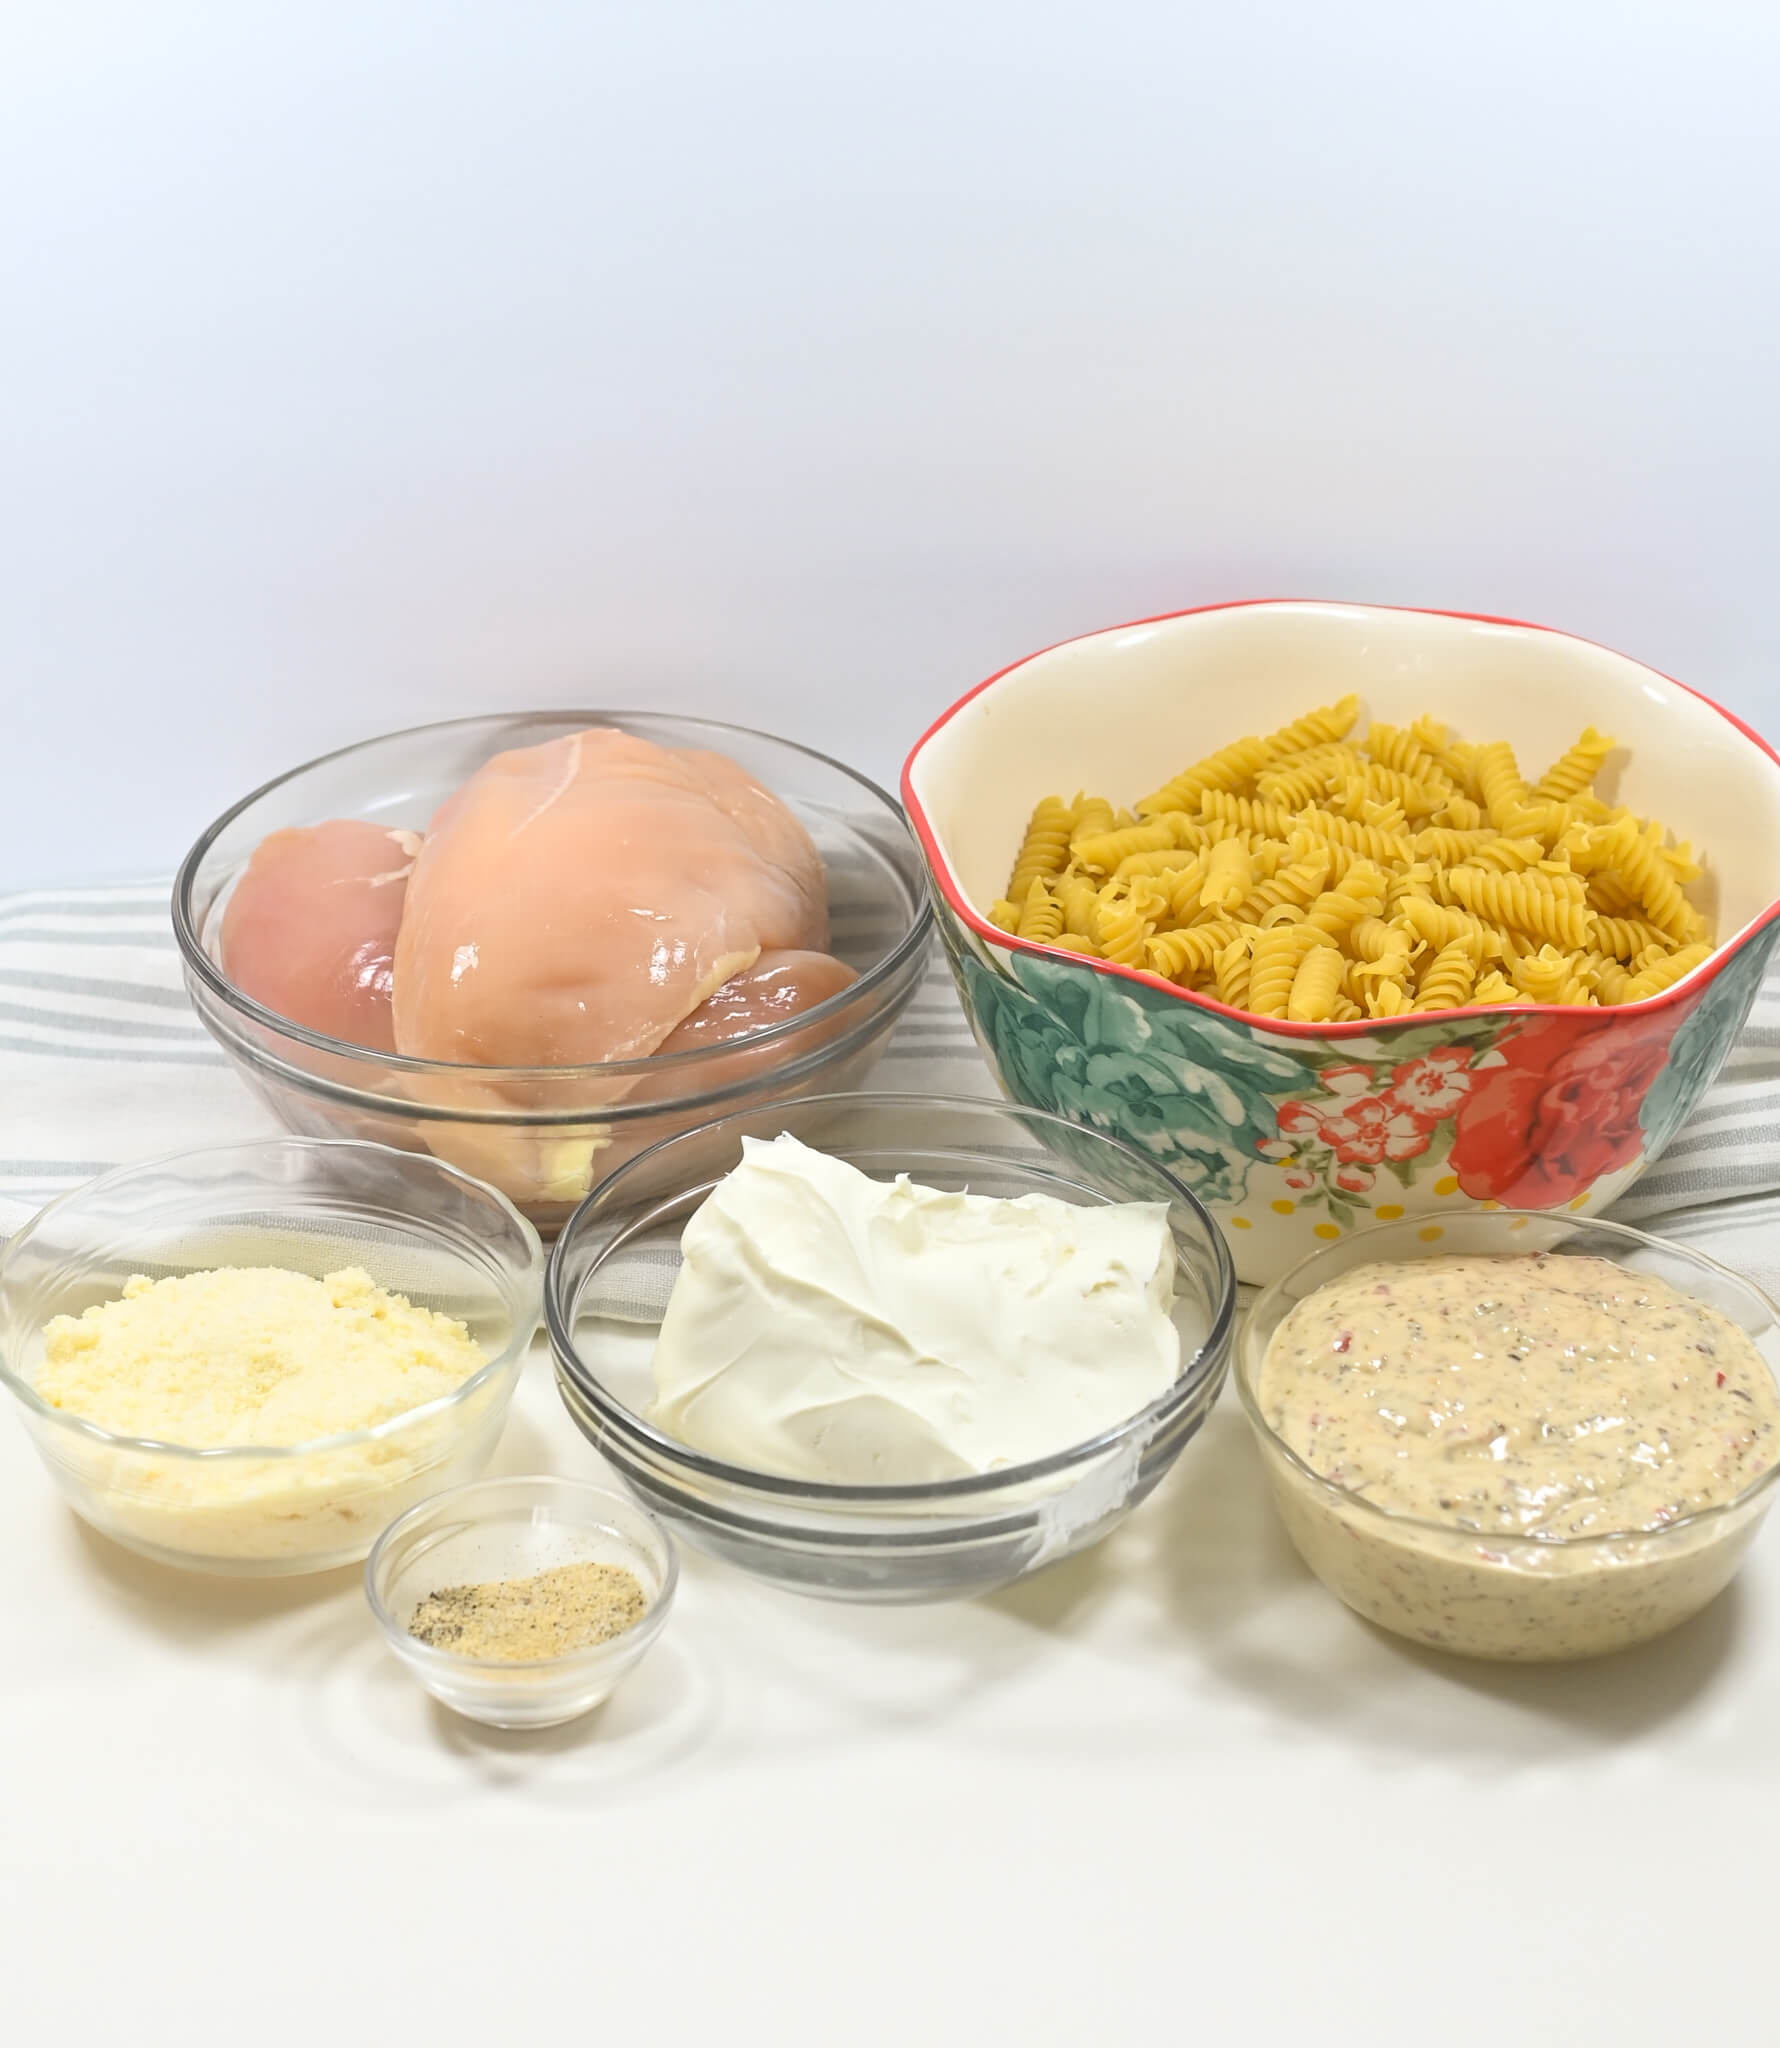 Ingredients for cooking laid out on a table, including raw chicken breasts, pasta, cream, spices, grated Parmesan cheese, and a bowl of garlic sauce.